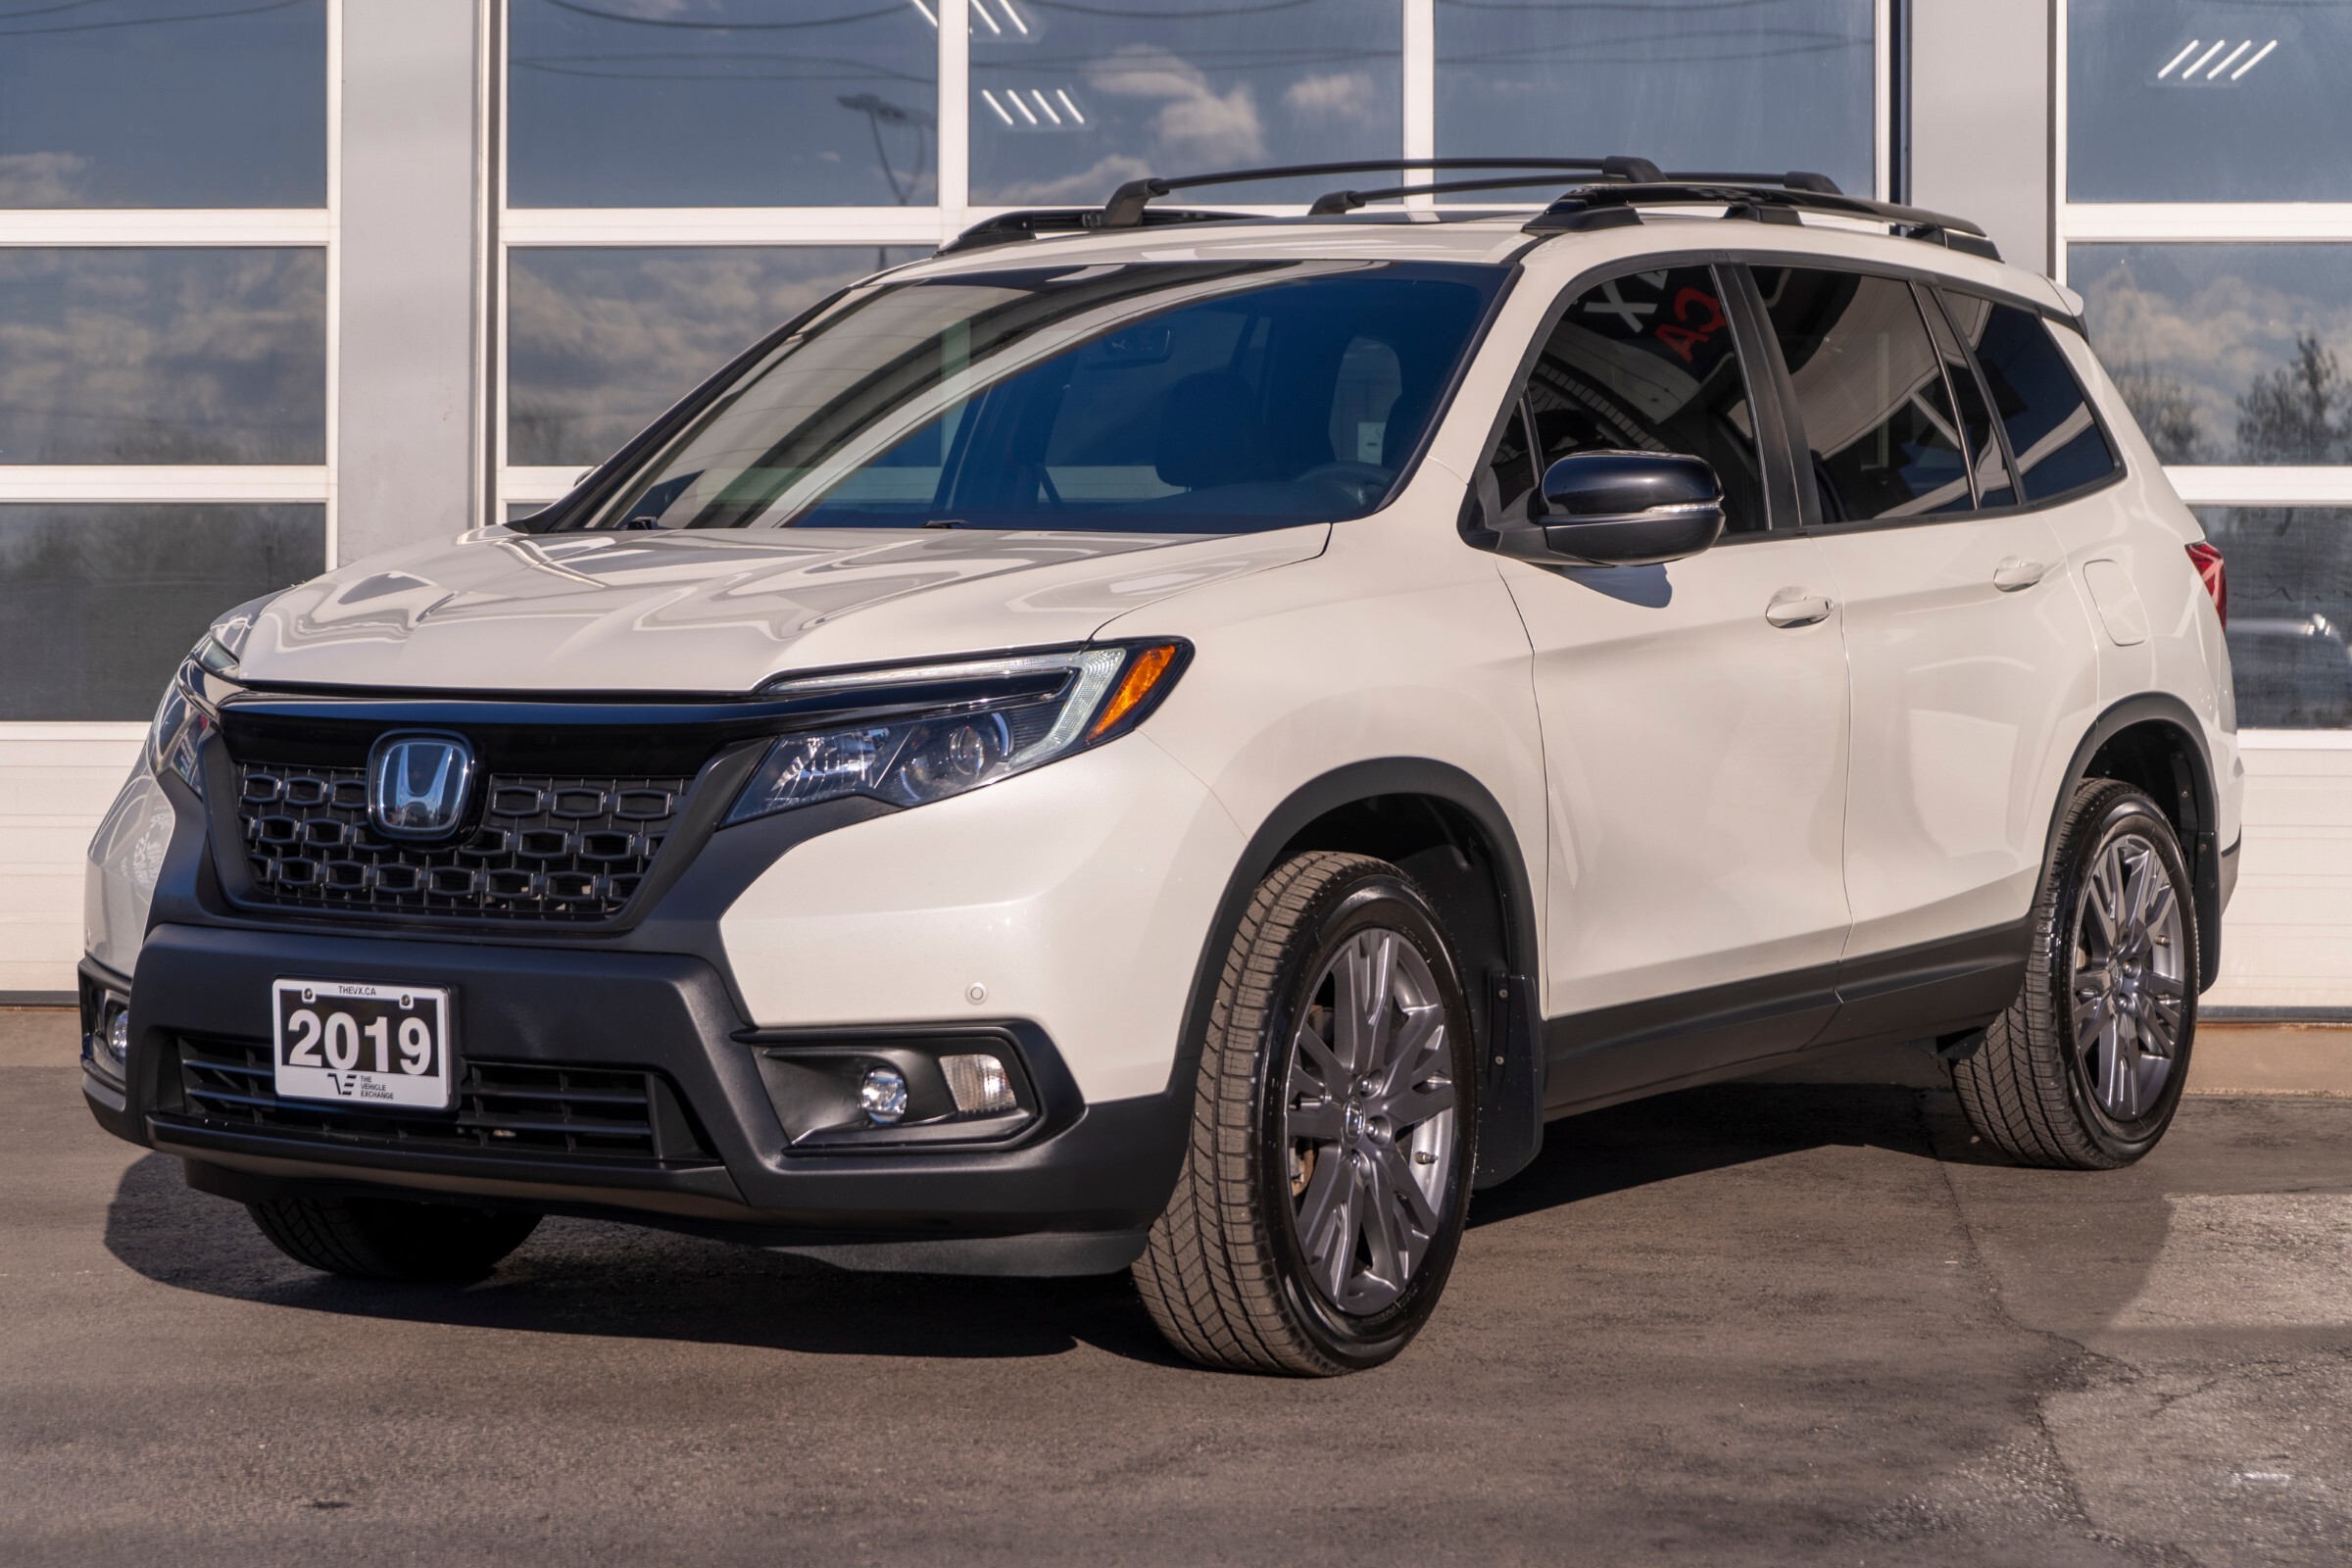 2019 Honda Passport One Owner/ No Accidents/ Leather/ Dvd/ Sunroof